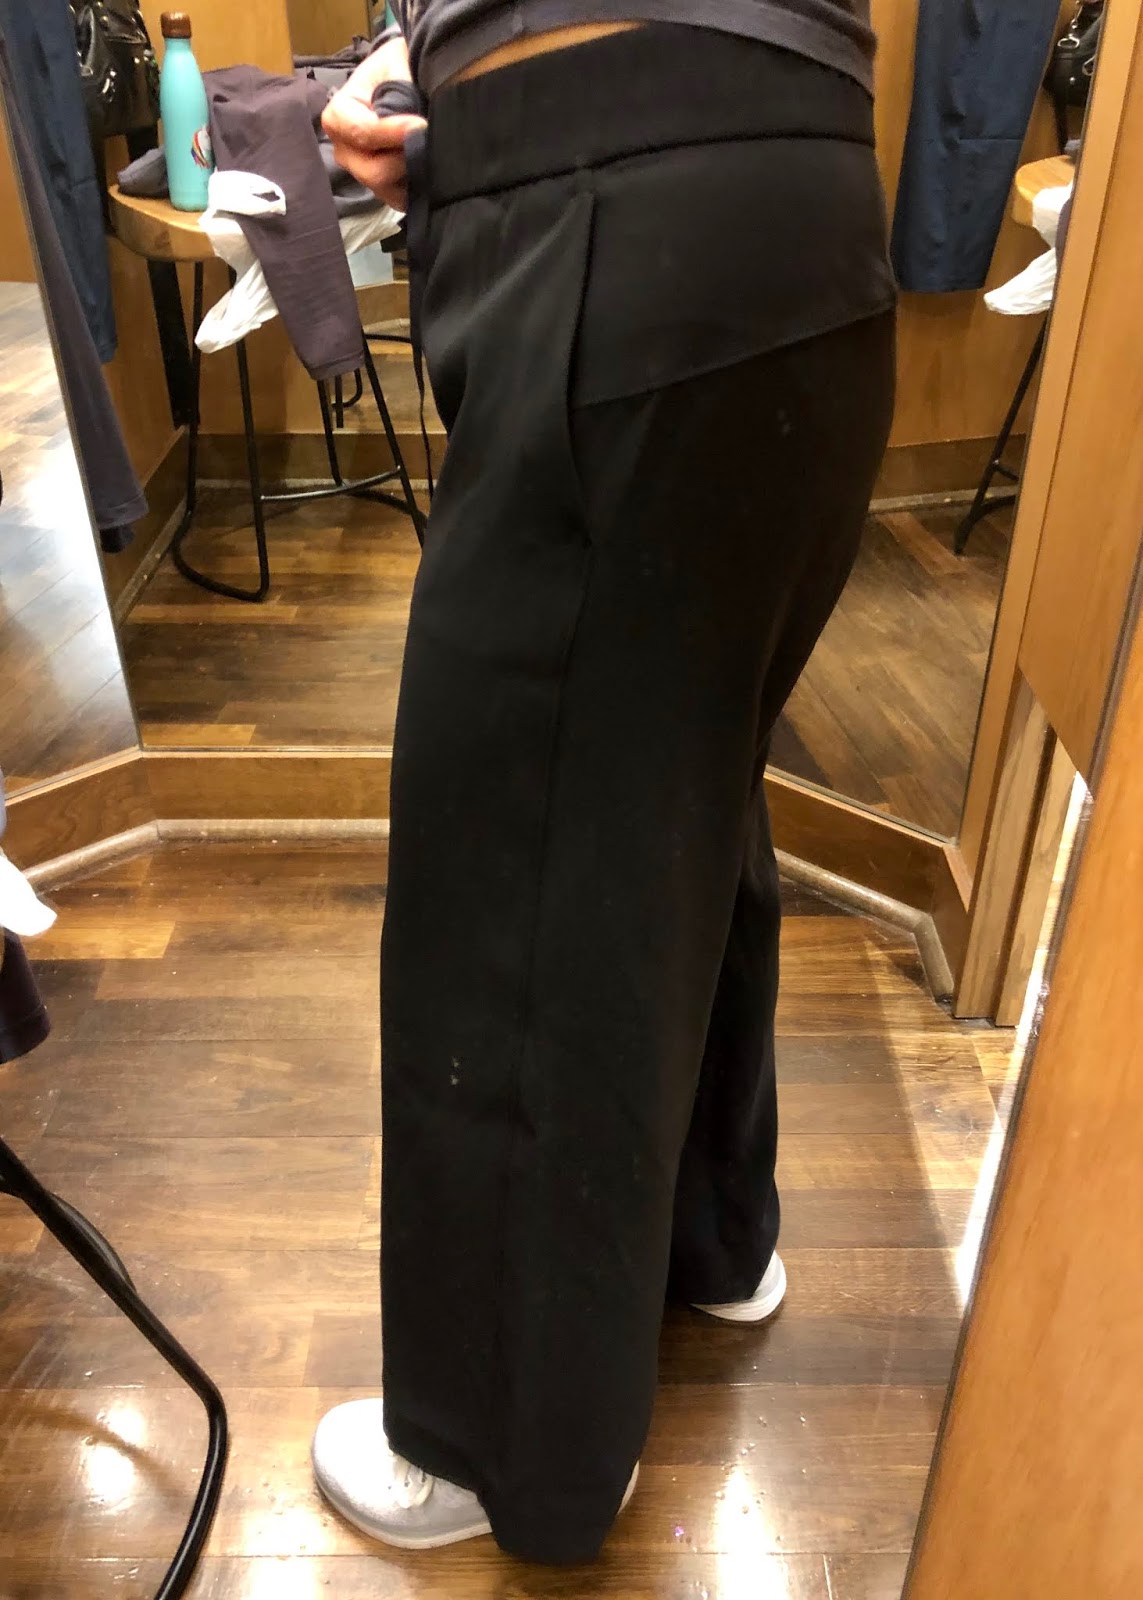 Fit Review Friday! On The Fly 7/8 Wide Leg Pant Woven & Wanderer Crop